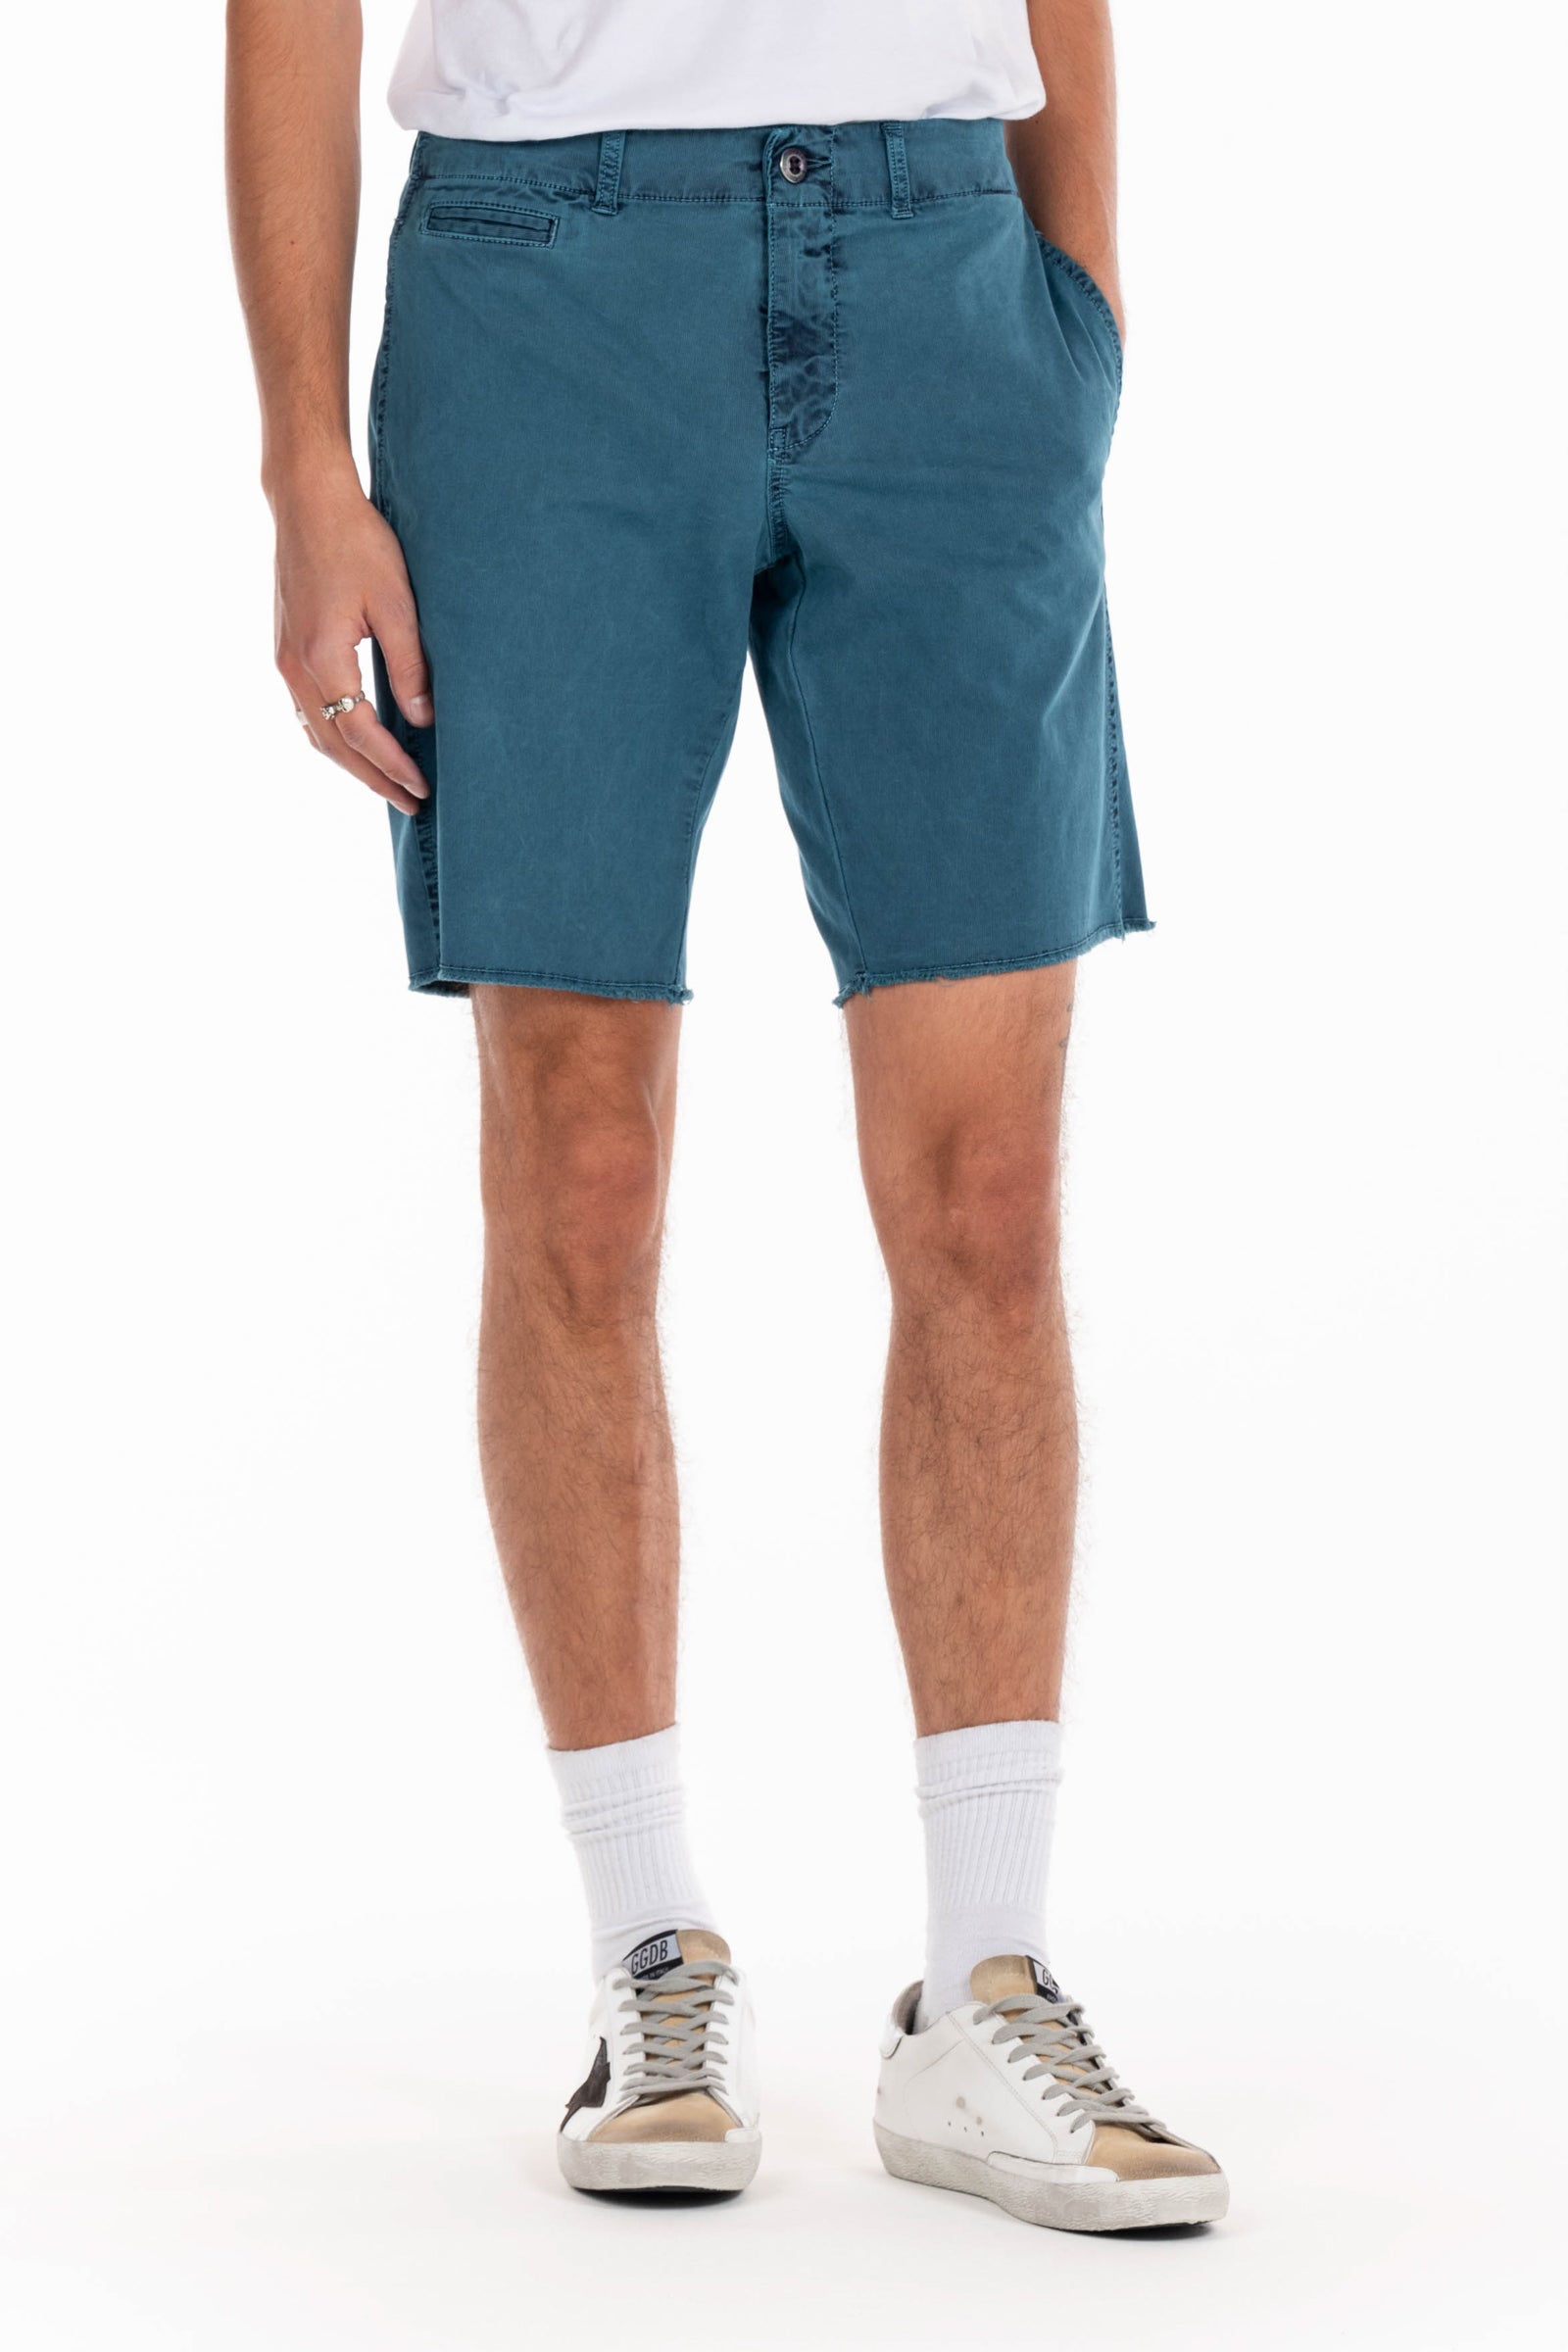 Original Paperbacks Rockland Chino Short in Dark Sea on Model Cropped Styled View